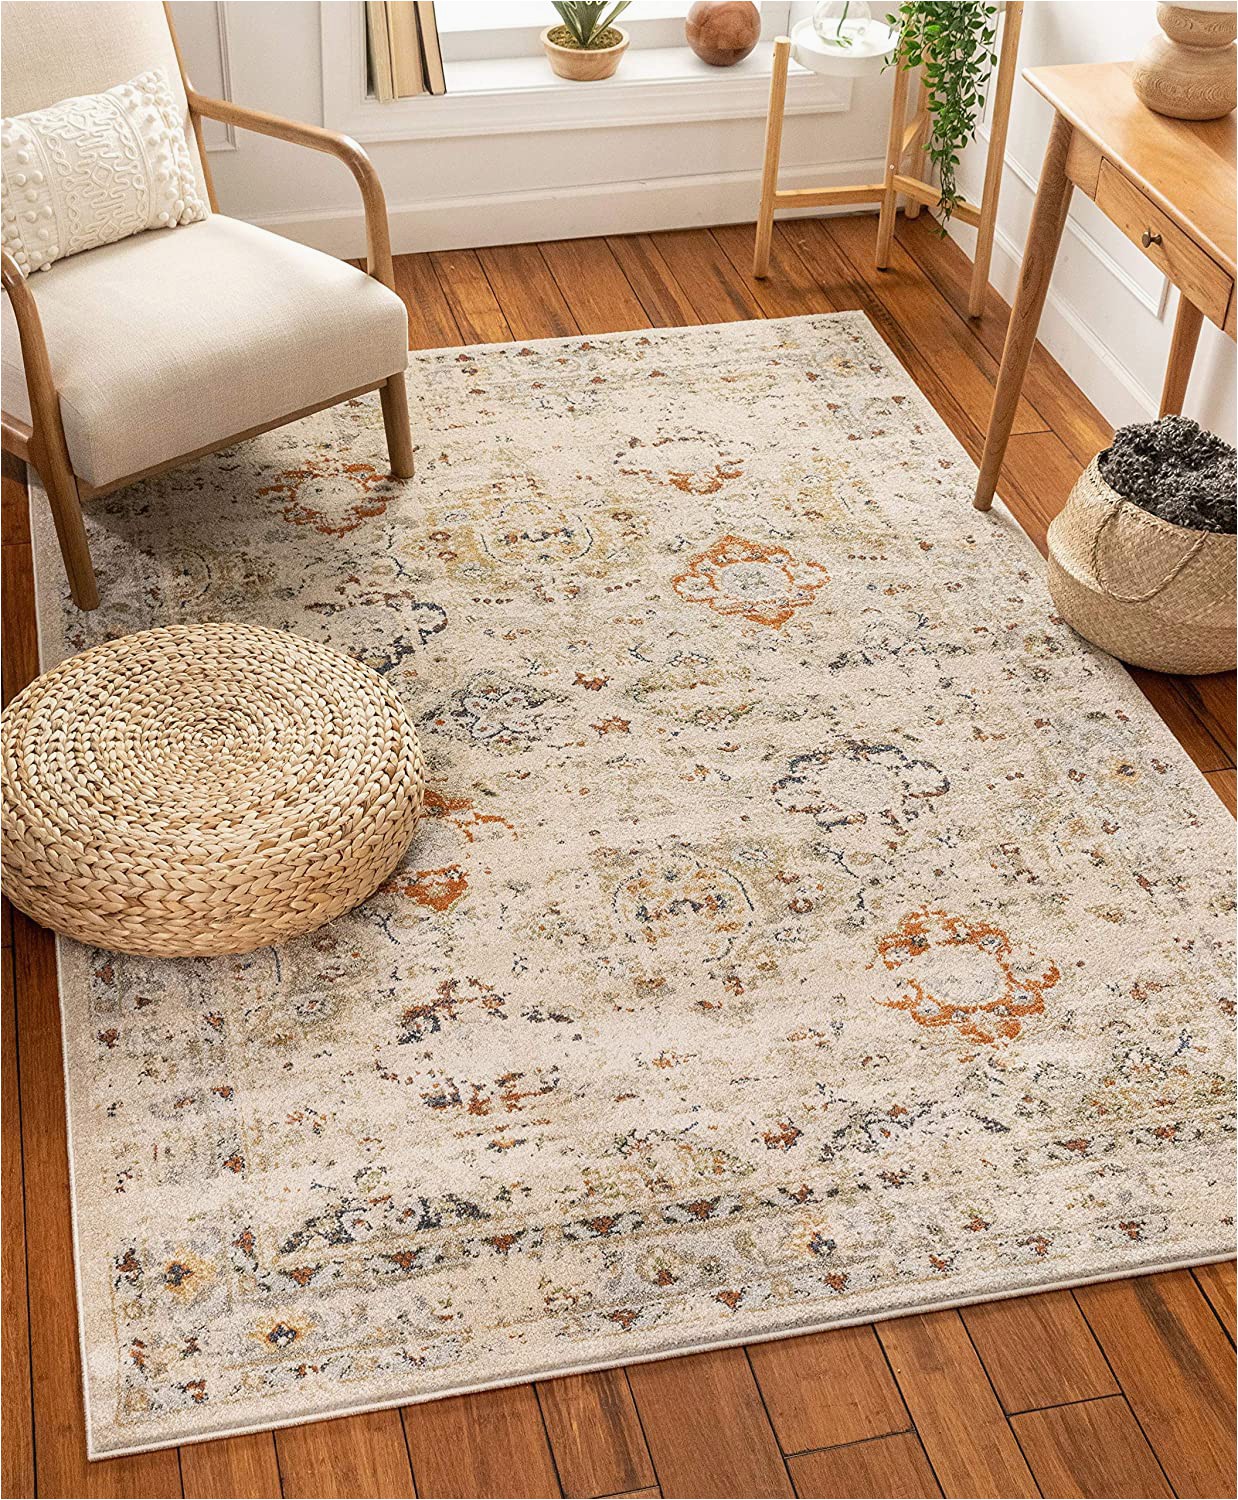 Bed Bath and Beyond area Rugs 9×12 Well Woven Kellie Cream Vintage oriental Pattern area Rug 8×11 7 10" X 10 6"